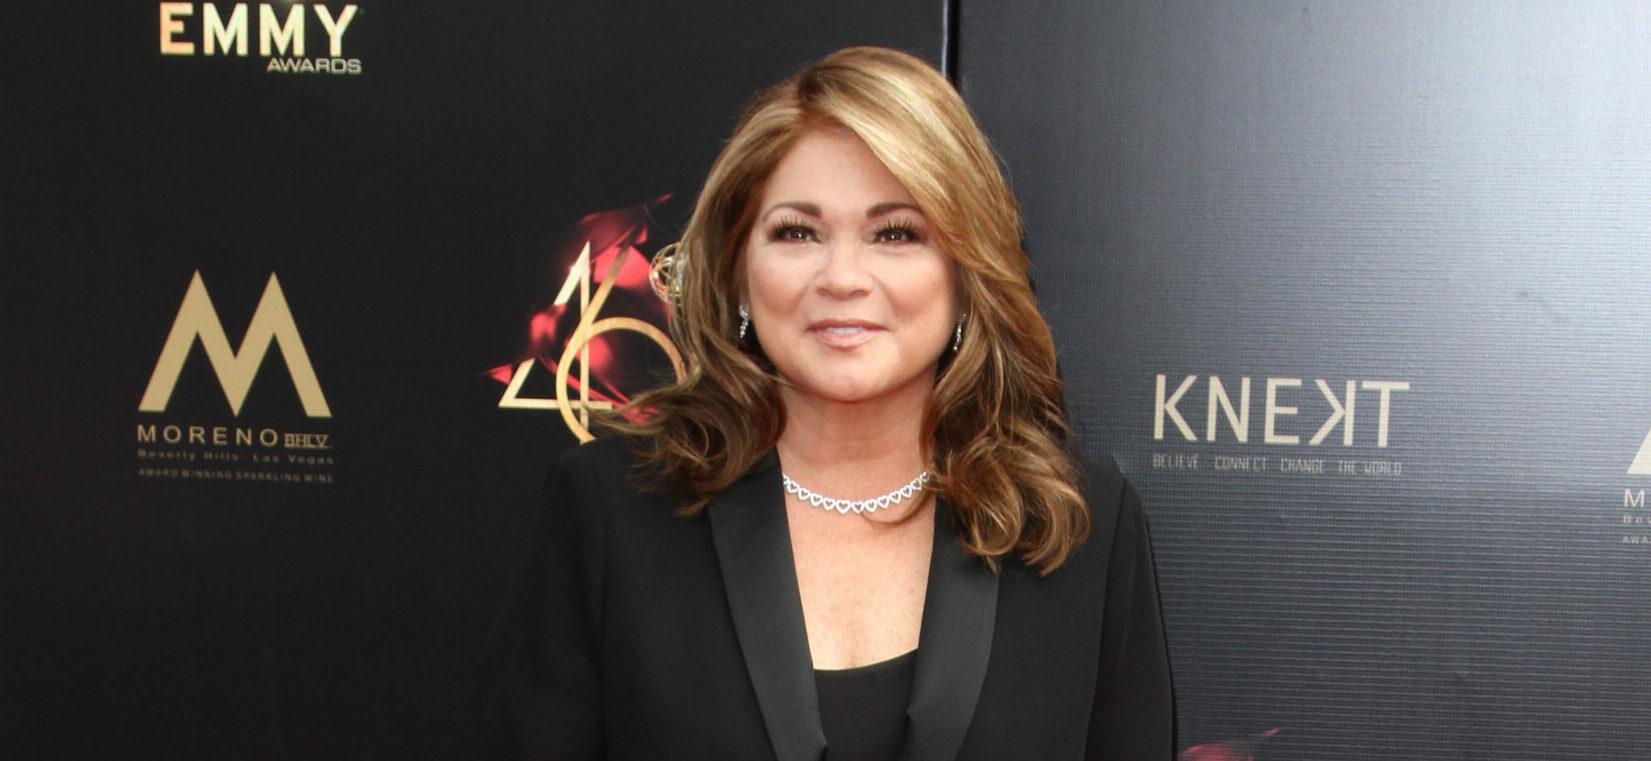 Valerie Bertinelli at The 46th Annual Daytime Emmy Awards Arrivals in Los Angeles